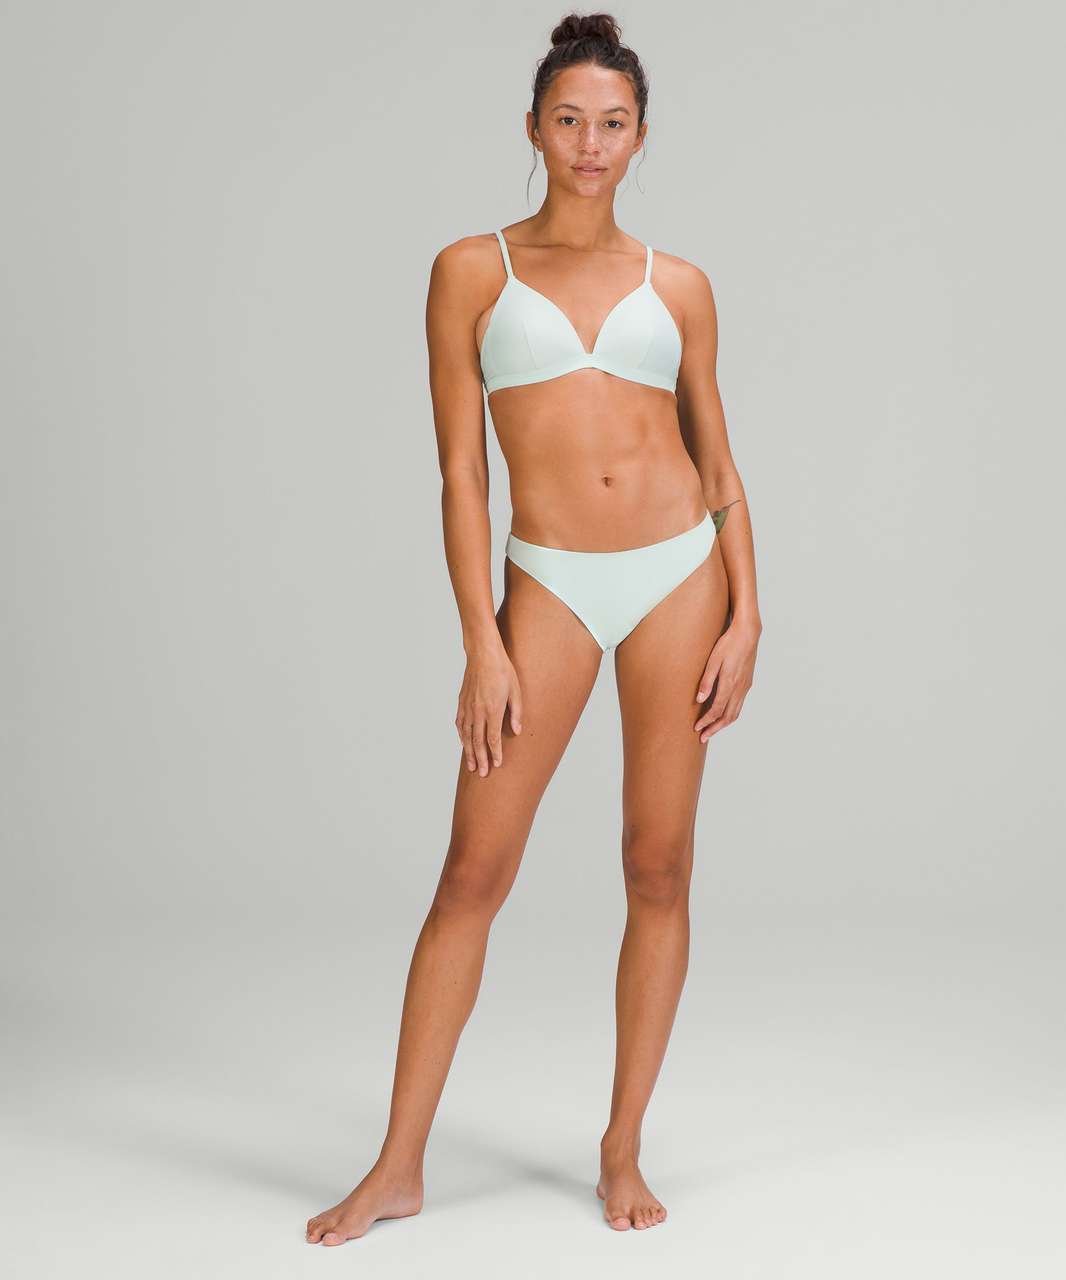 Lululemon Waterside Swim Top A/B Size 4 - $55 New With Tags - From Connie